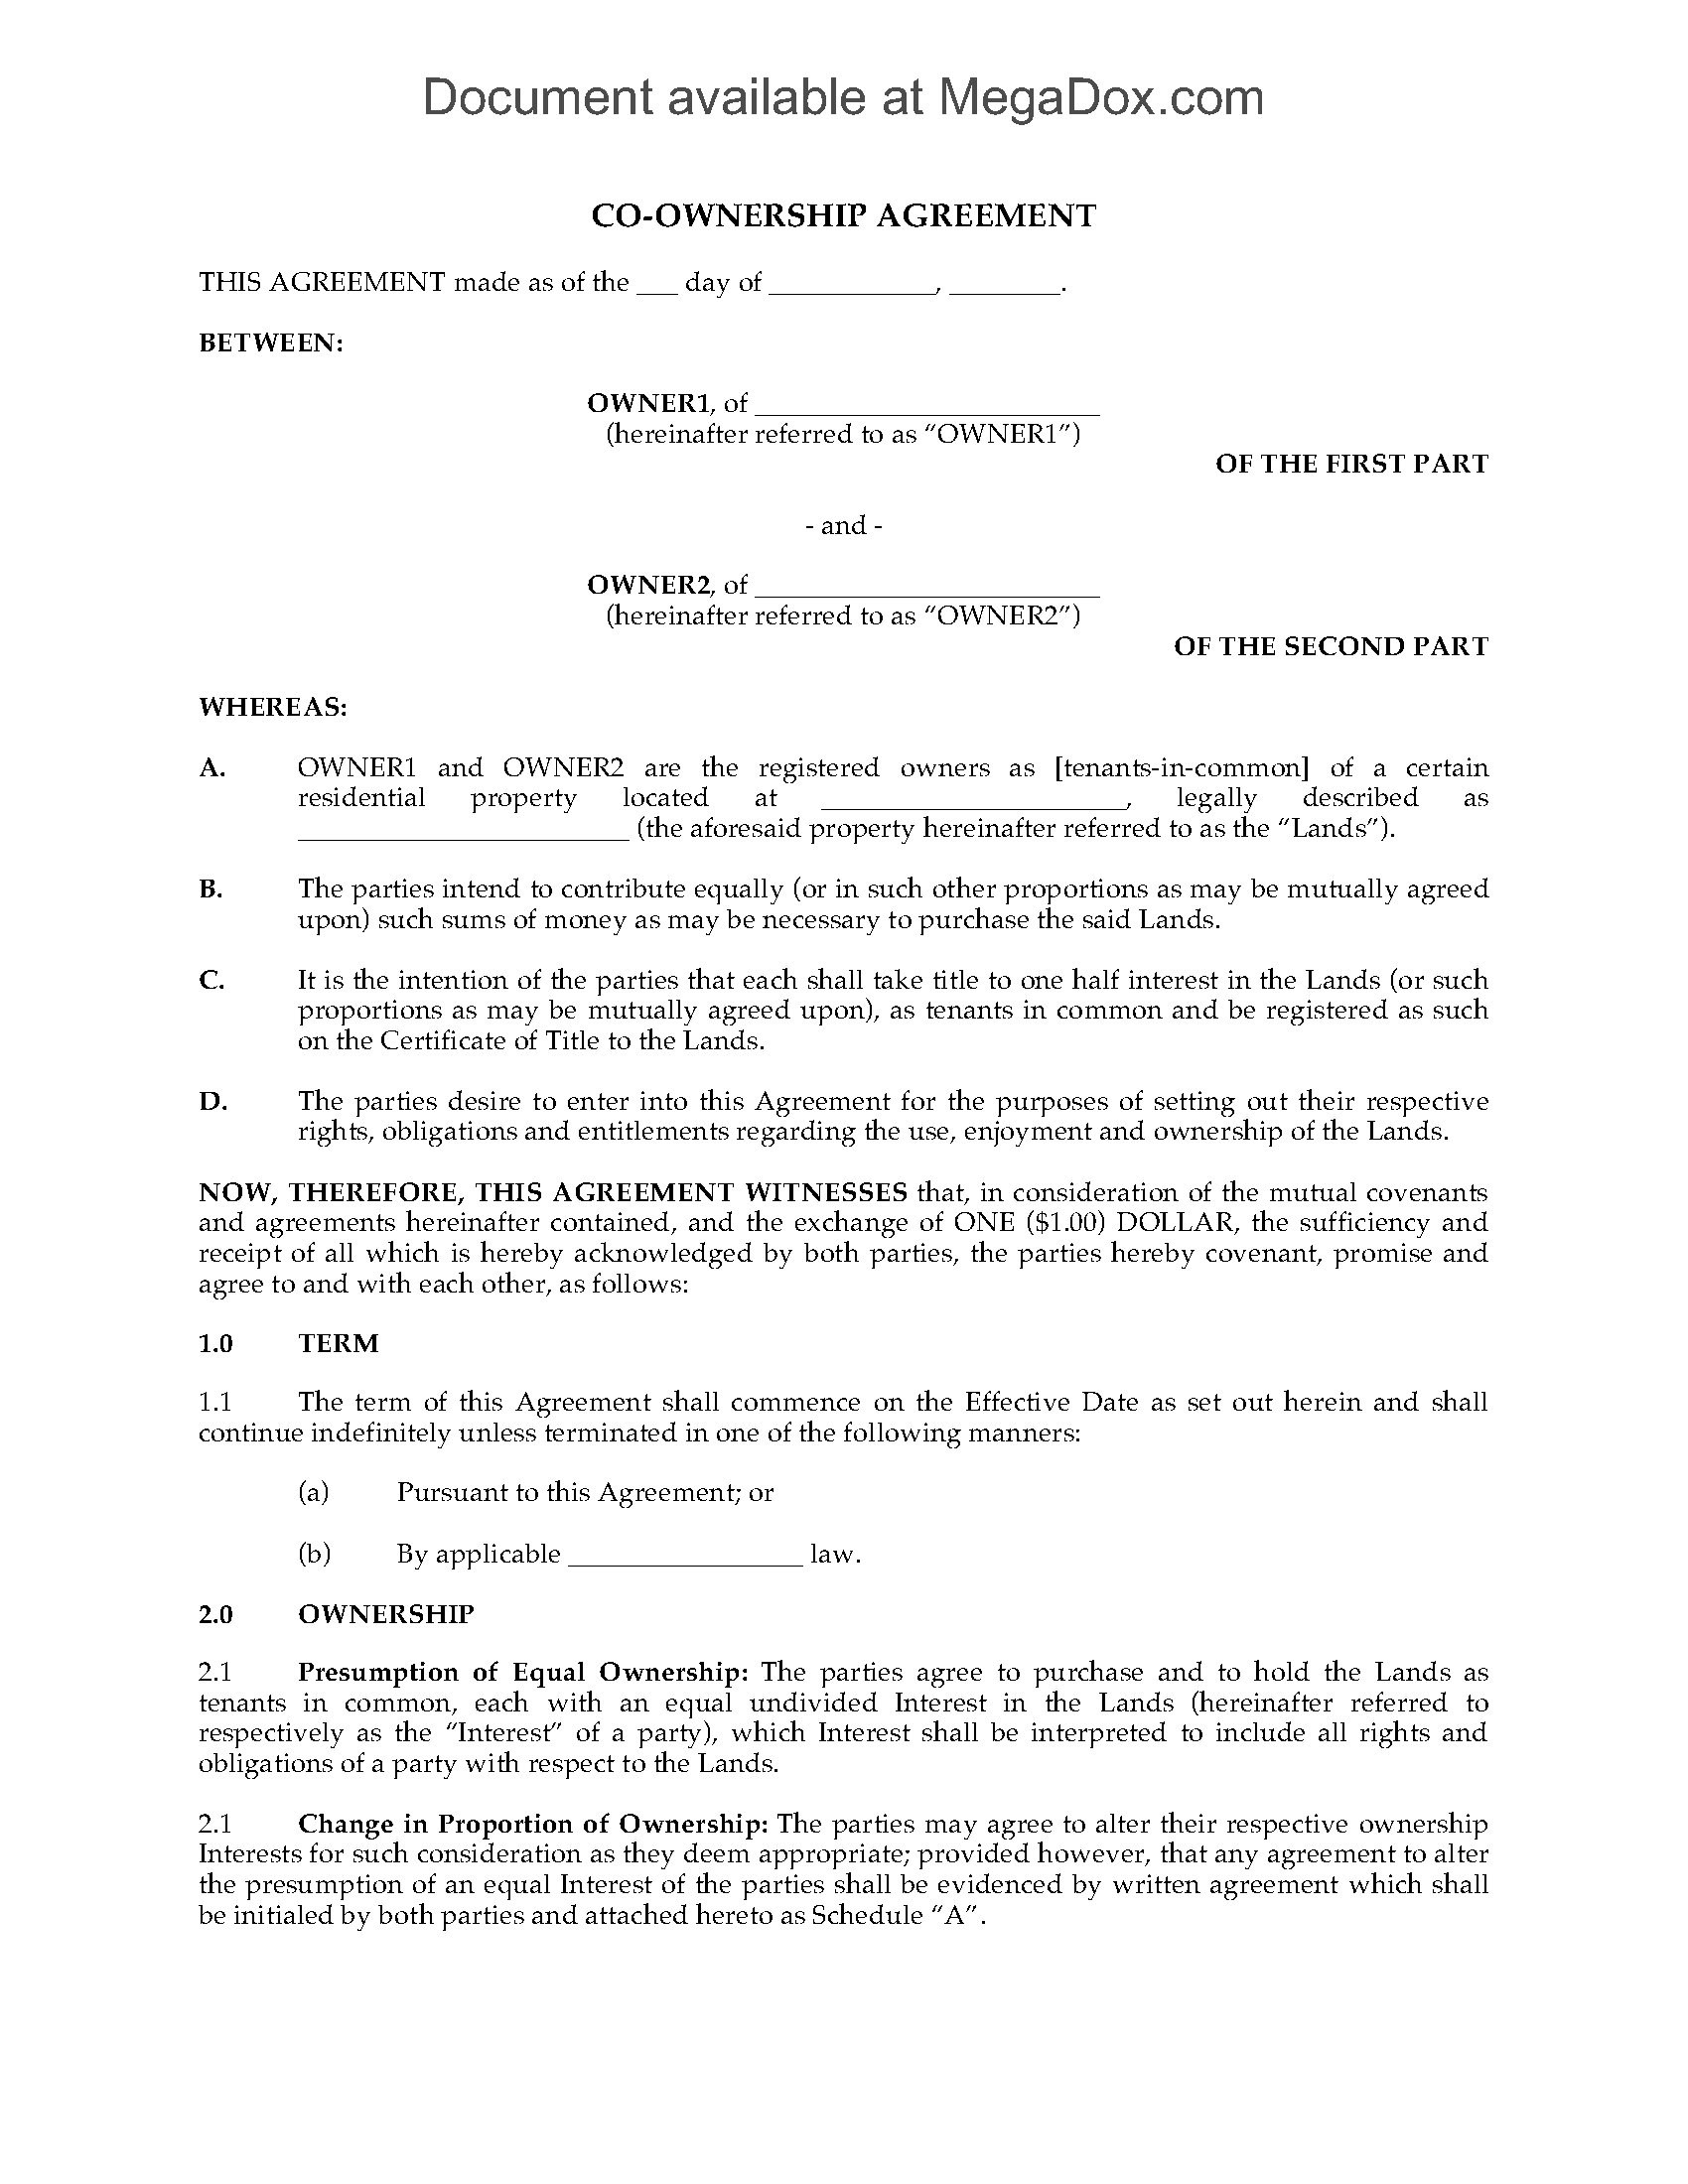 Land Co Ownership Agreement Legal Forms And Business Templates Document Contract Template